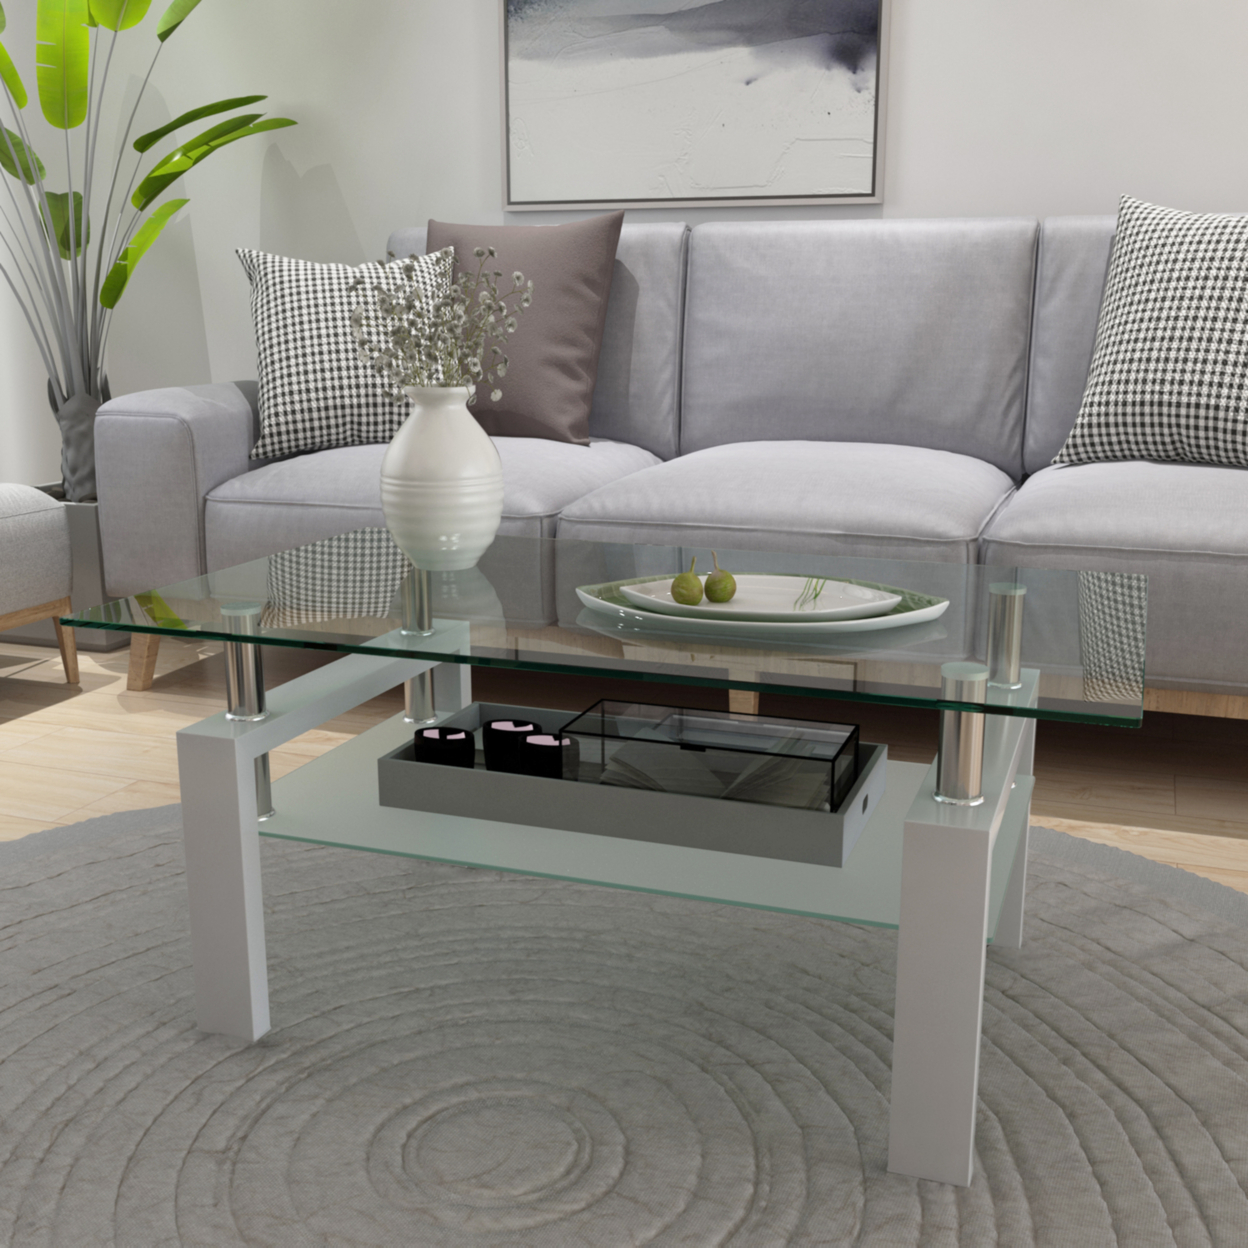 White Coffee Table, Clear Coffee Tableï¿½ï¿½Modern Side Center Tables for Living Roomï¿½ï¿½ Living Room Furniture